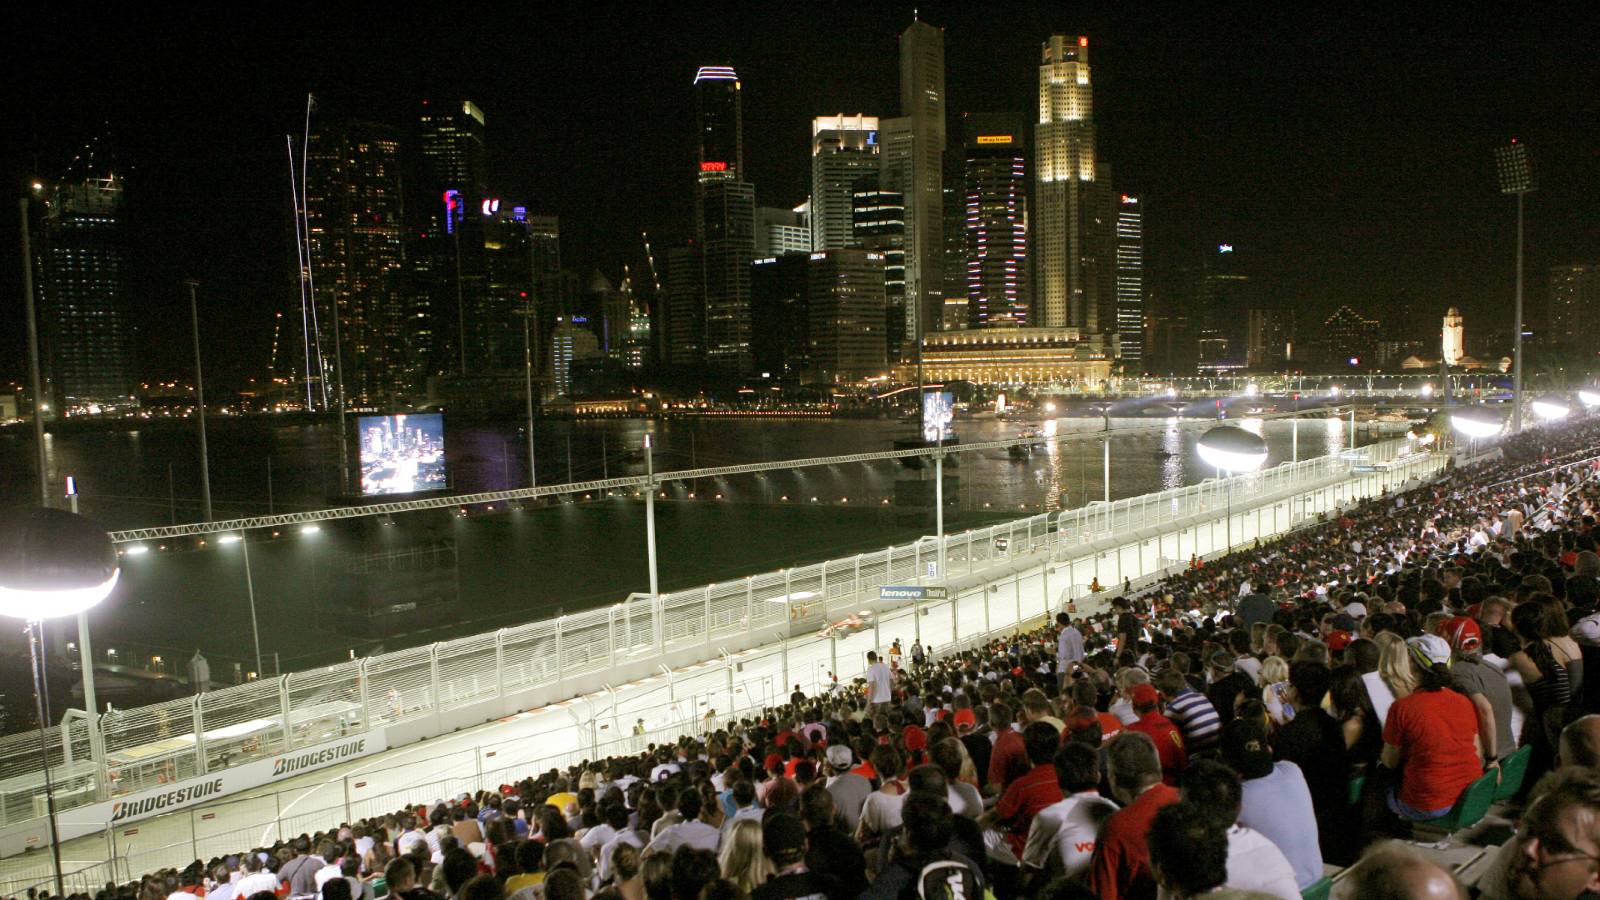 Is rain forecast for the Singapore Grand Prix at Marina Bay?